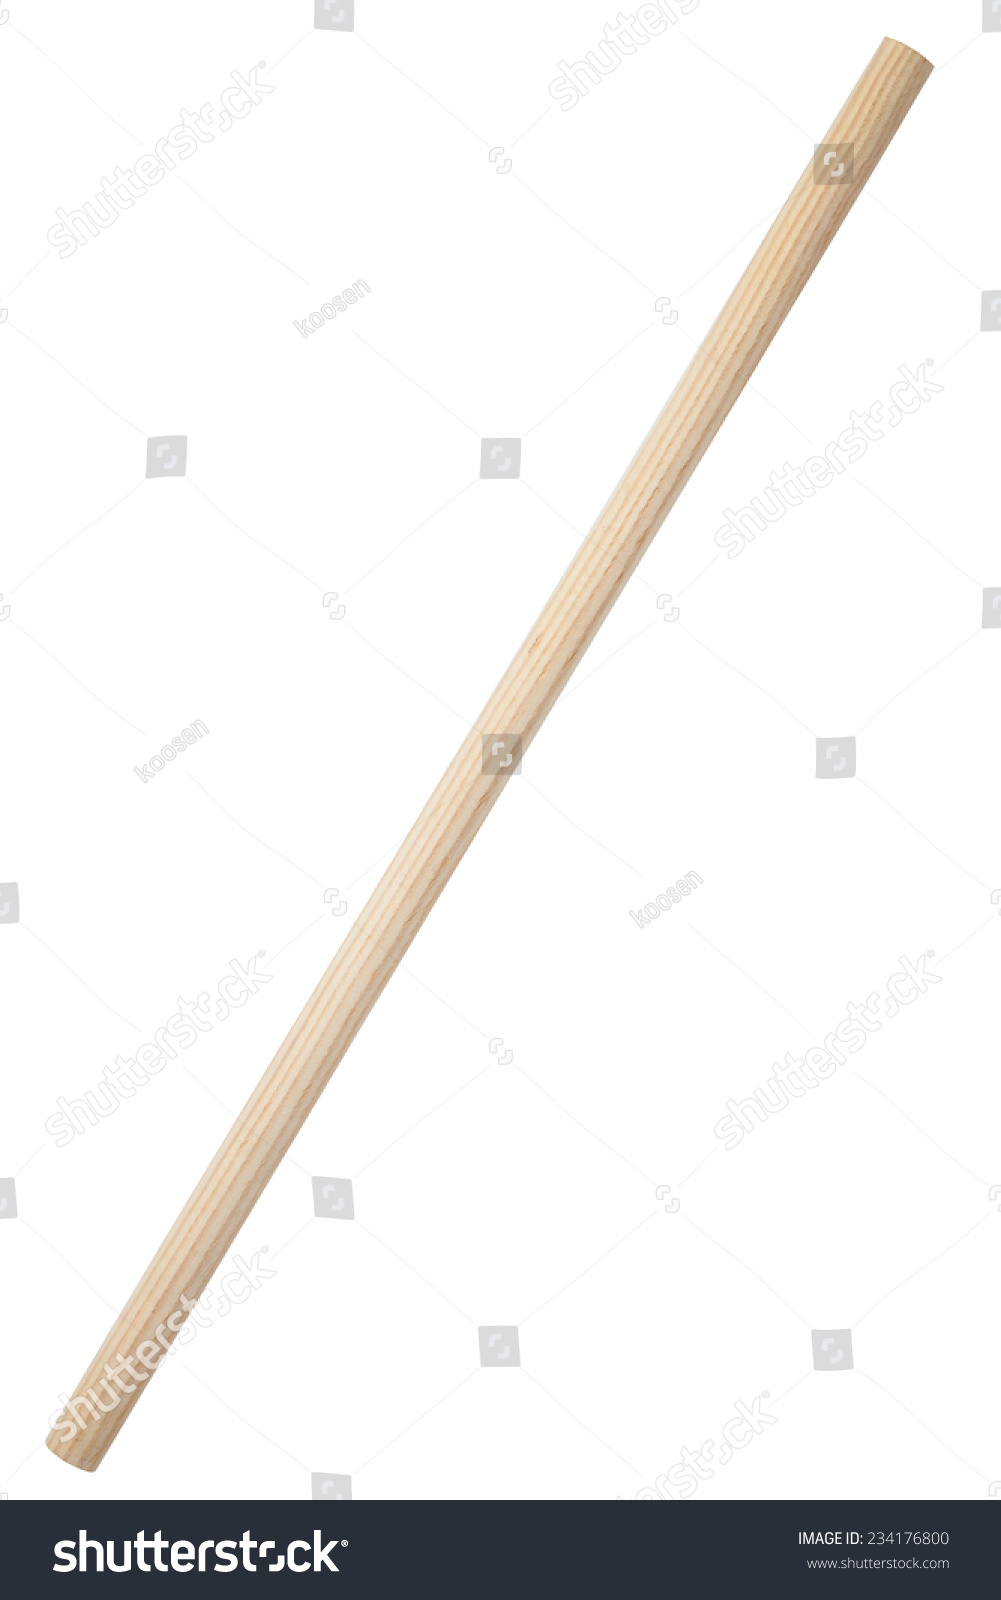 Wooden stick isolated on white background #234176800